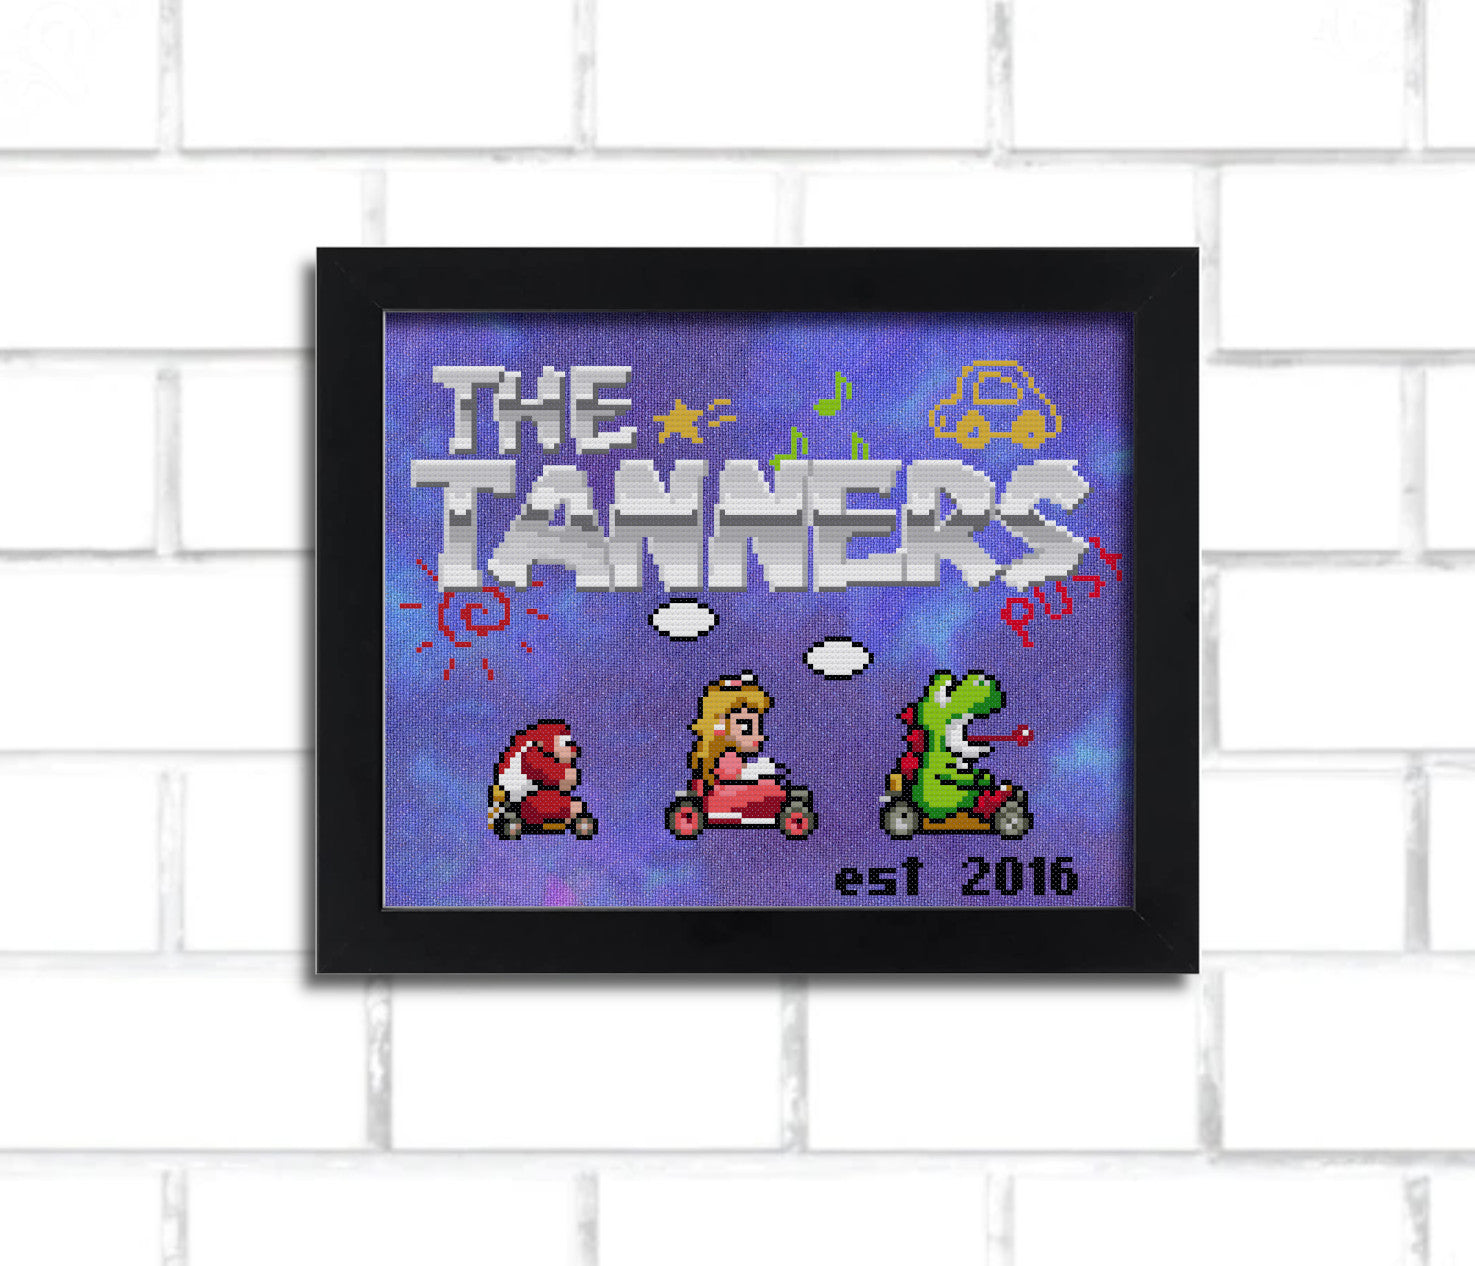 A digital render of a cross stitch, it says "the tanners" in a metallic looking 8 bit mario-inspired font and features Super Mario Kart inspired sprites of Yoshi, Peach, and small Donkey Kong. it's in a black frame hung on a white brick wall.